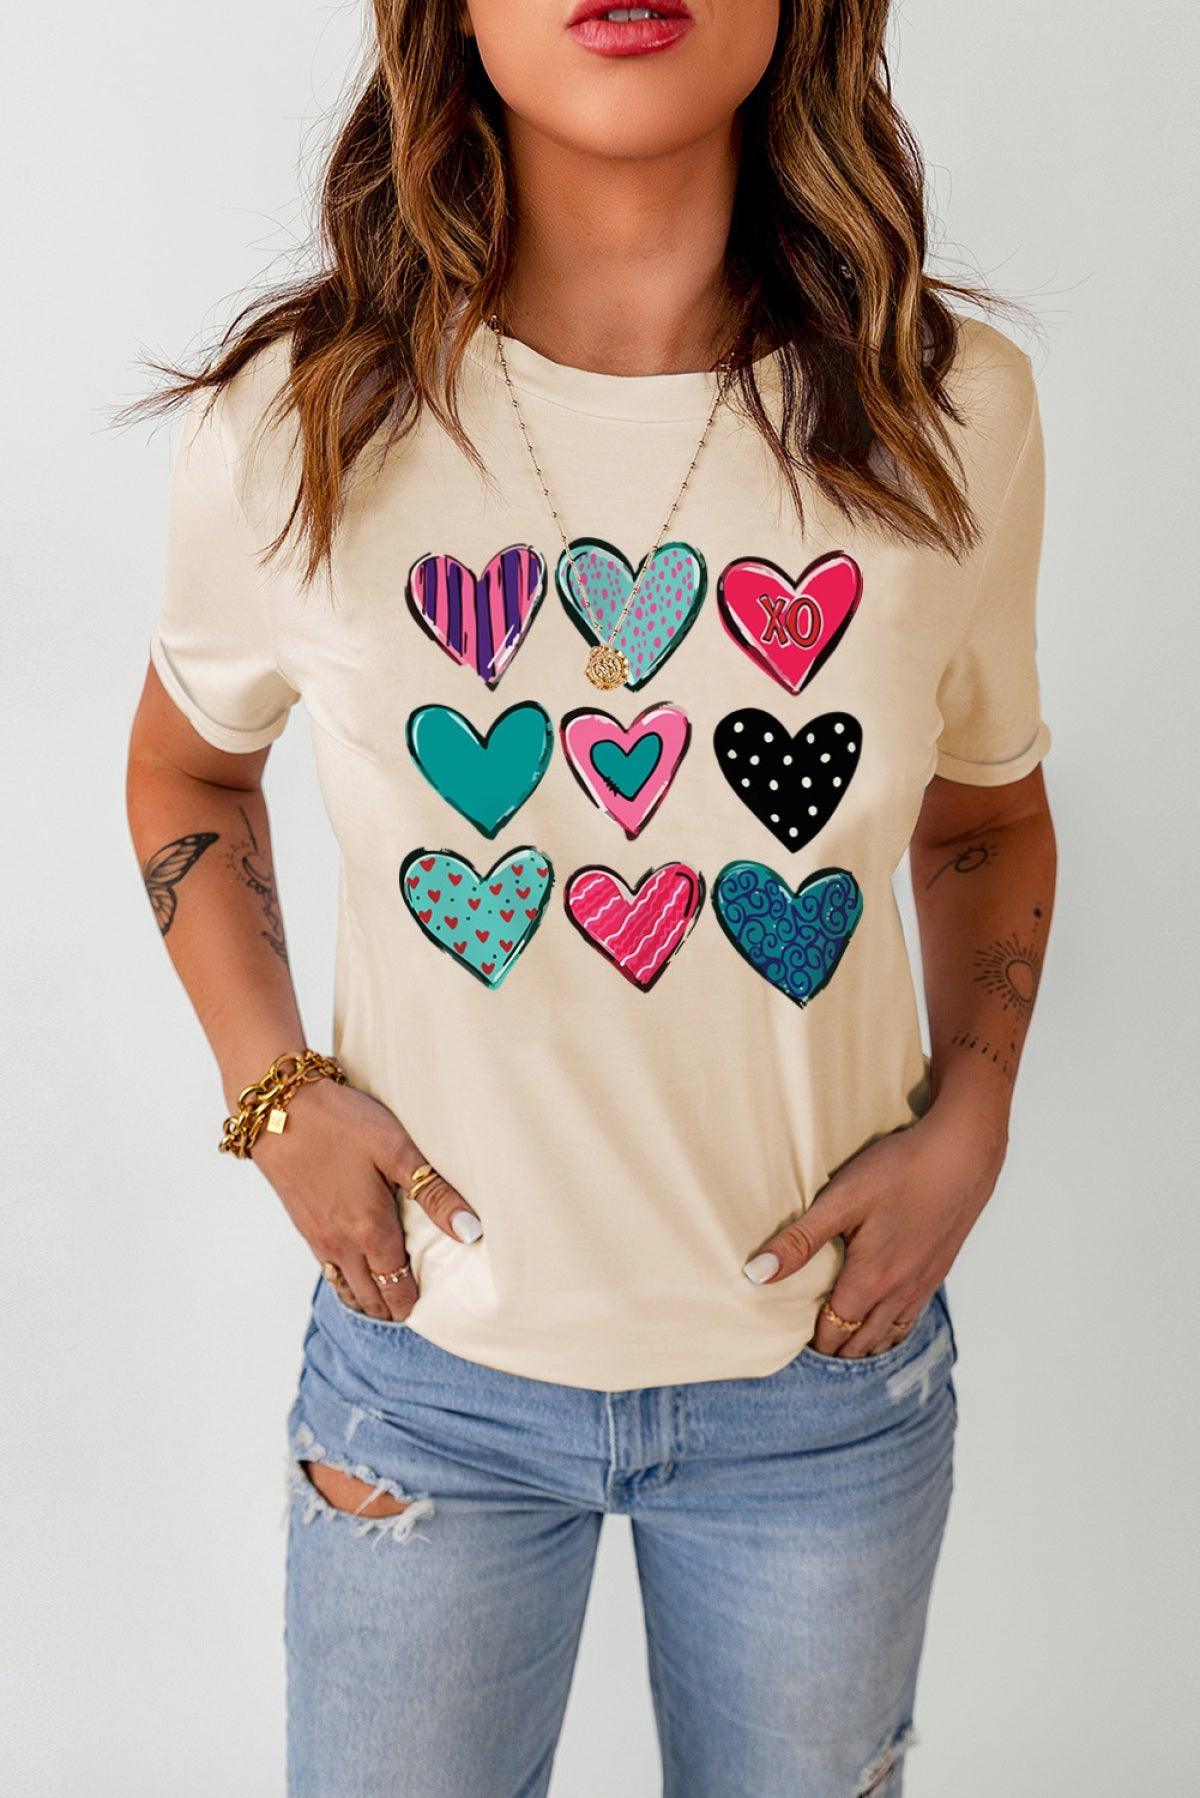 Find Your Essence of Life with Our Heart Print T-Shirt for Women